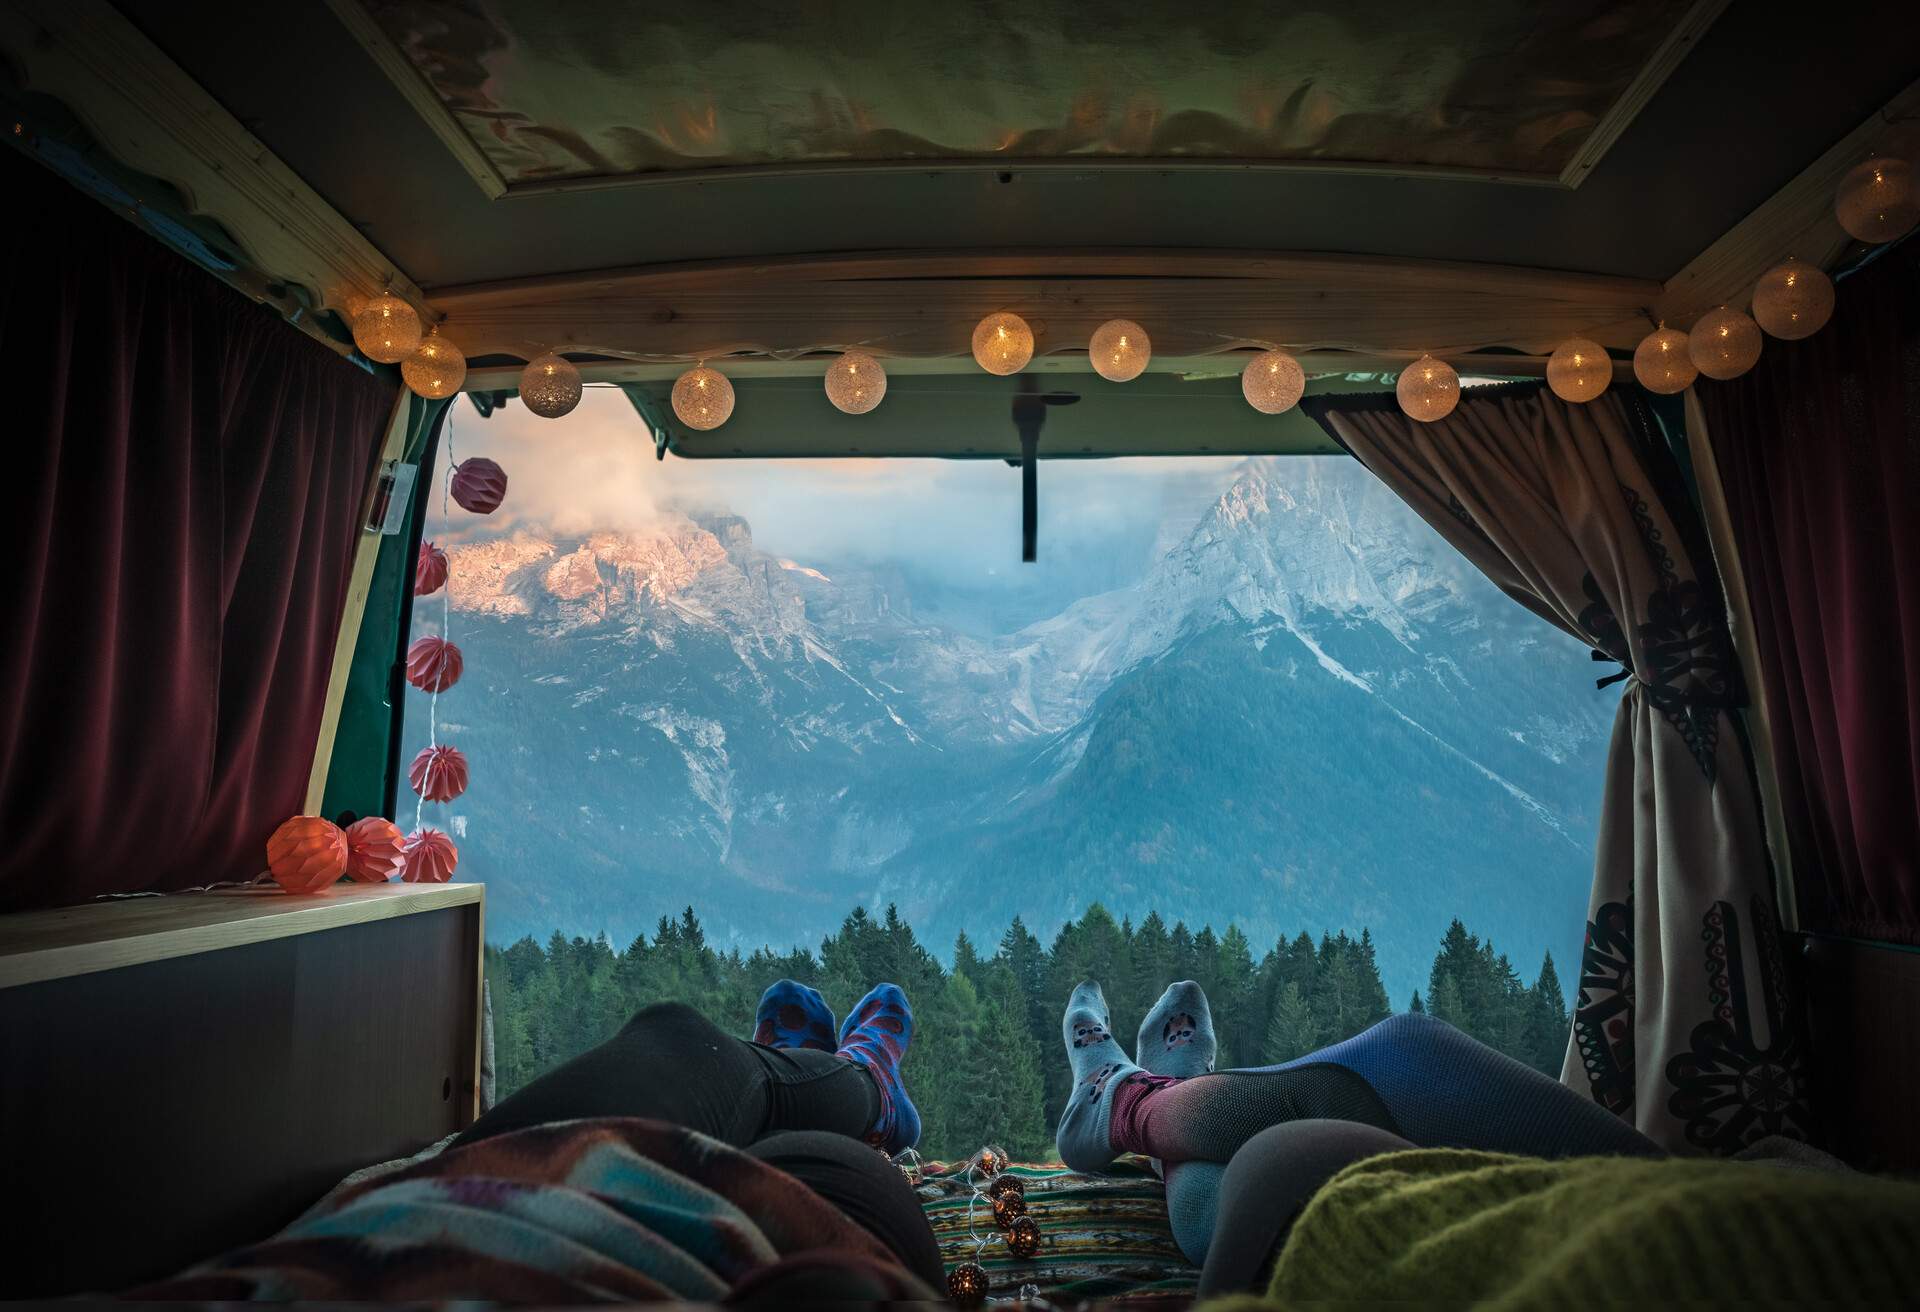 theme_people_car_outdoors_camper_camping_mountains_scenic-view-shutterstock-portfolio_1262301994_universal_within-usage-period_80066.jpg